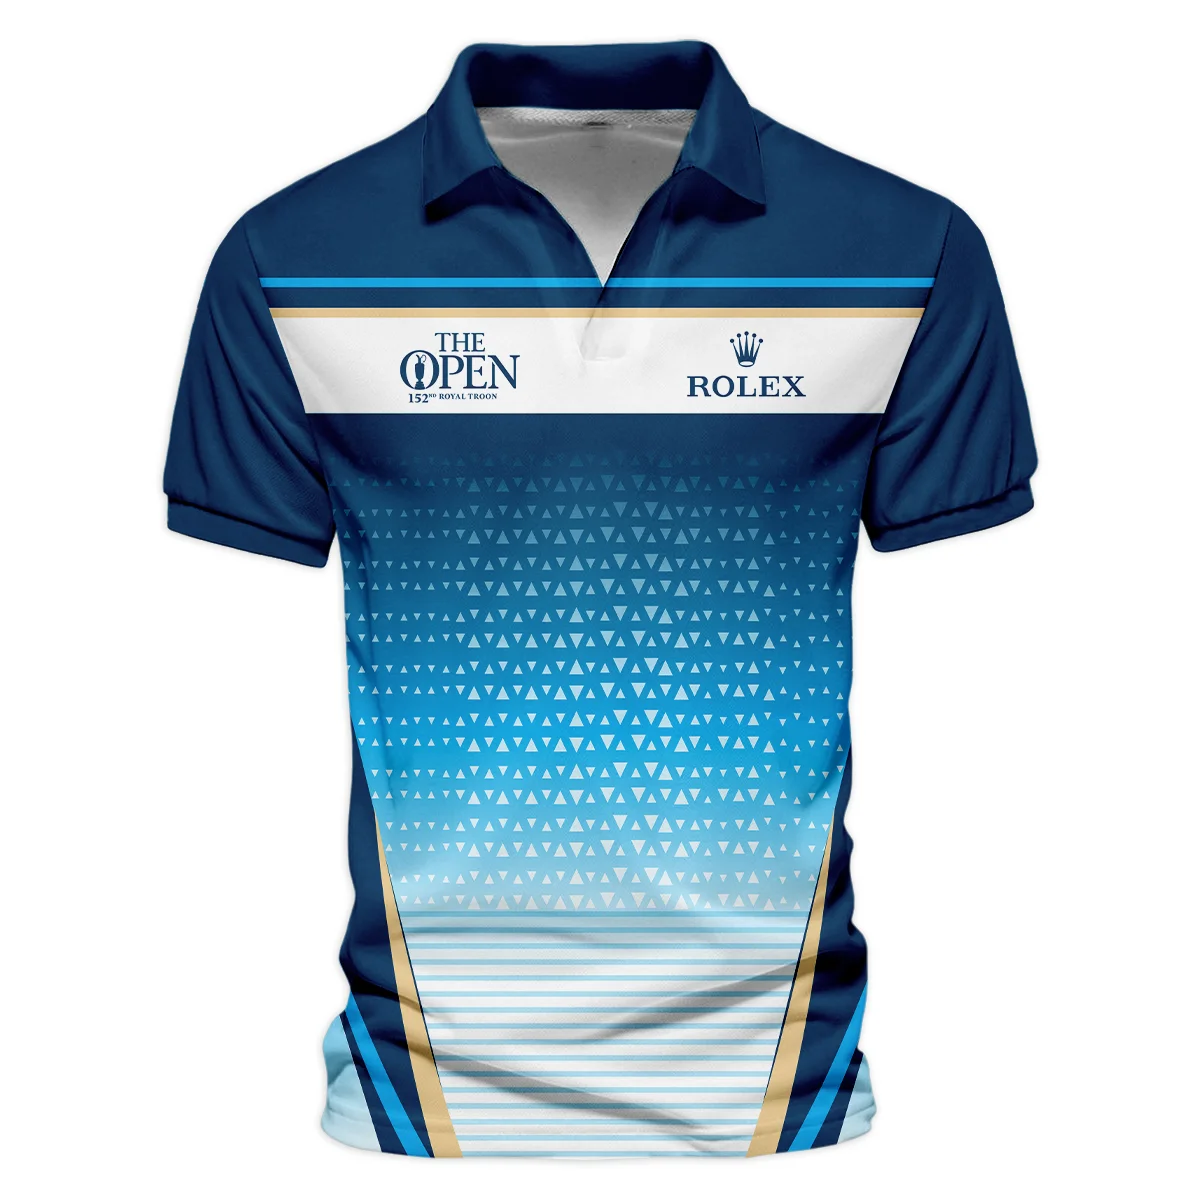 152nd The Open Championship Golf Blue Yellow White Pattern Background Rolex Zipper Polo Shirt All Over Prints HOTOP250624A01ROXZPL